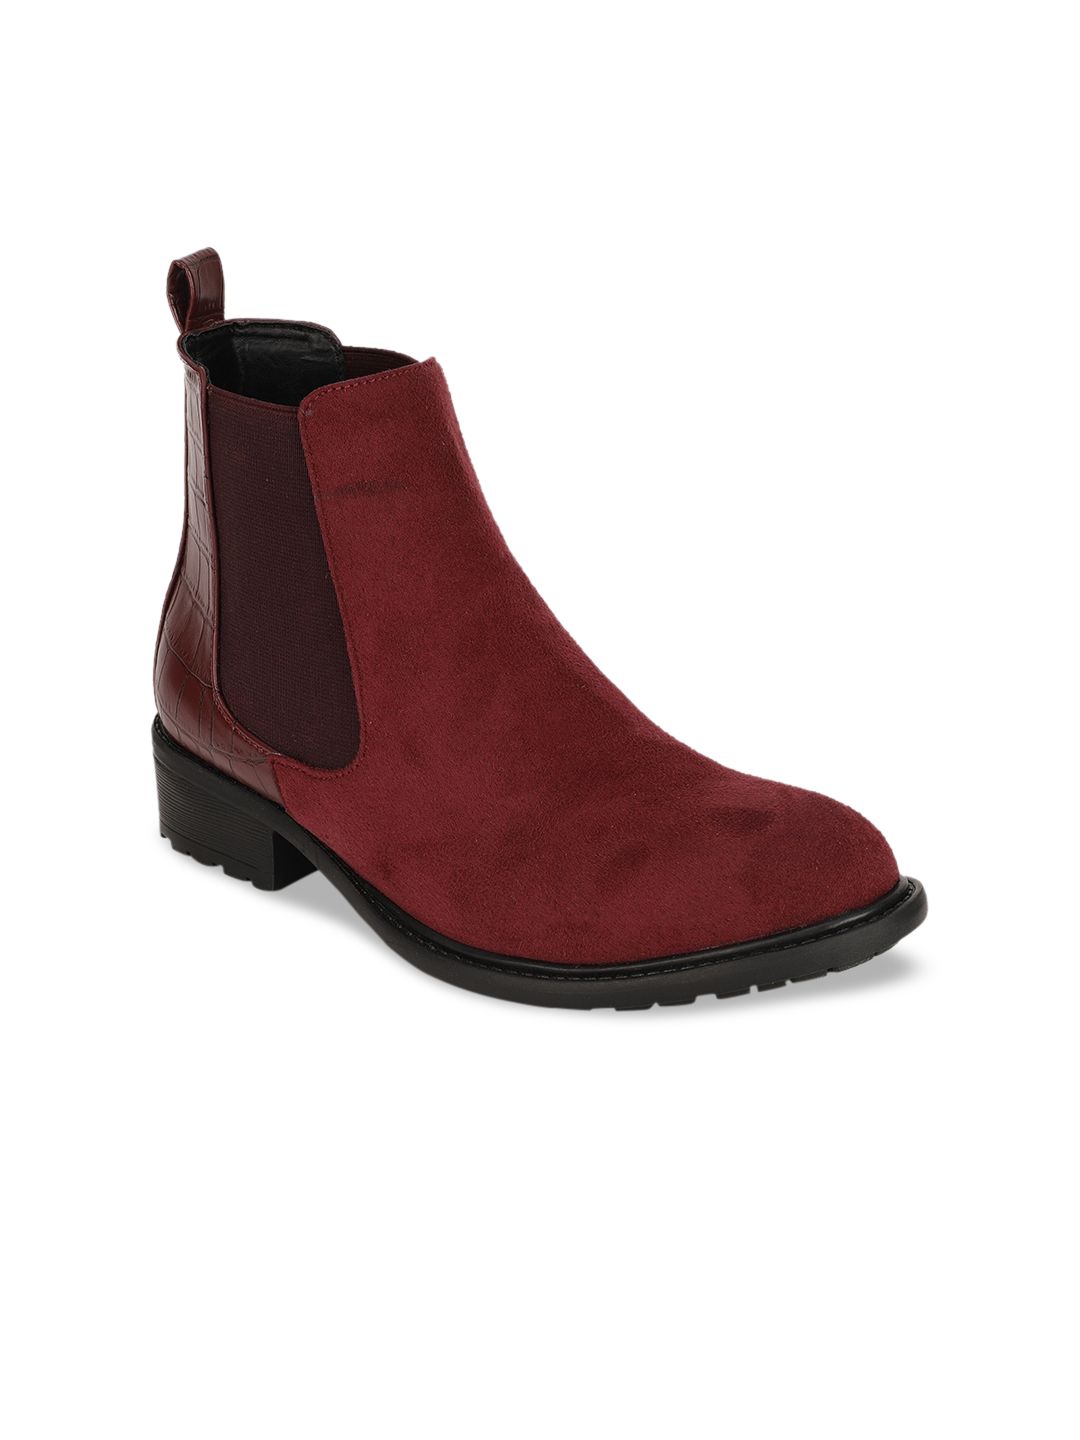 Bruno Manetti Women Maroon Suede Block Heeled Chelsea Boots Price in India